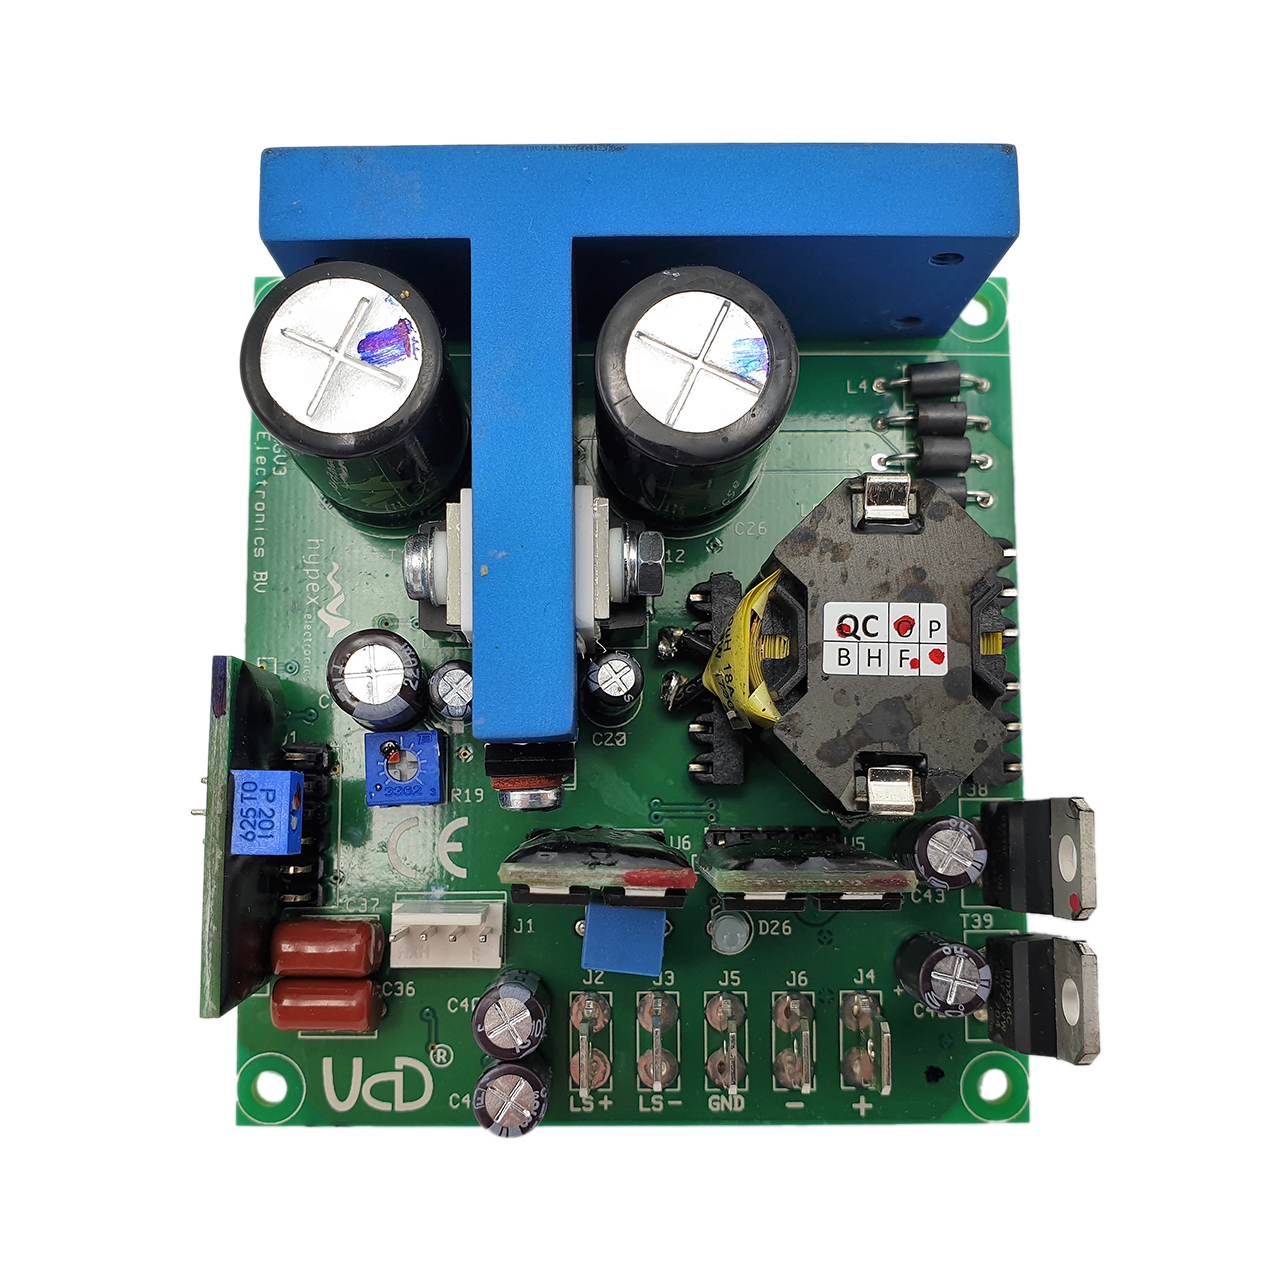 Hypex UcD™ 400HG with HXR amplifier module